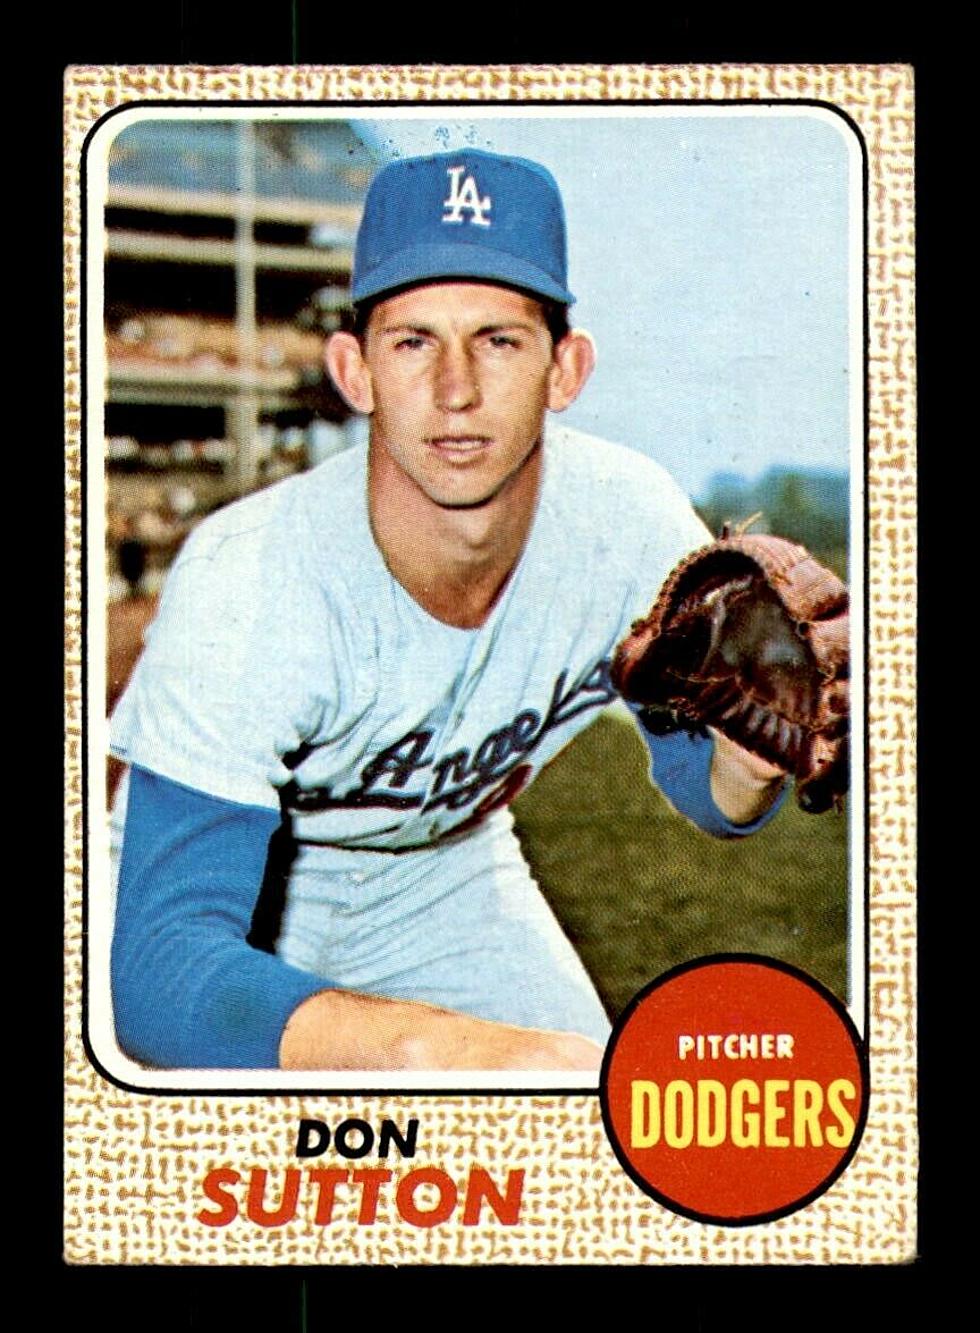 Baseball Hall of Fame Announces Death of Don Sutton